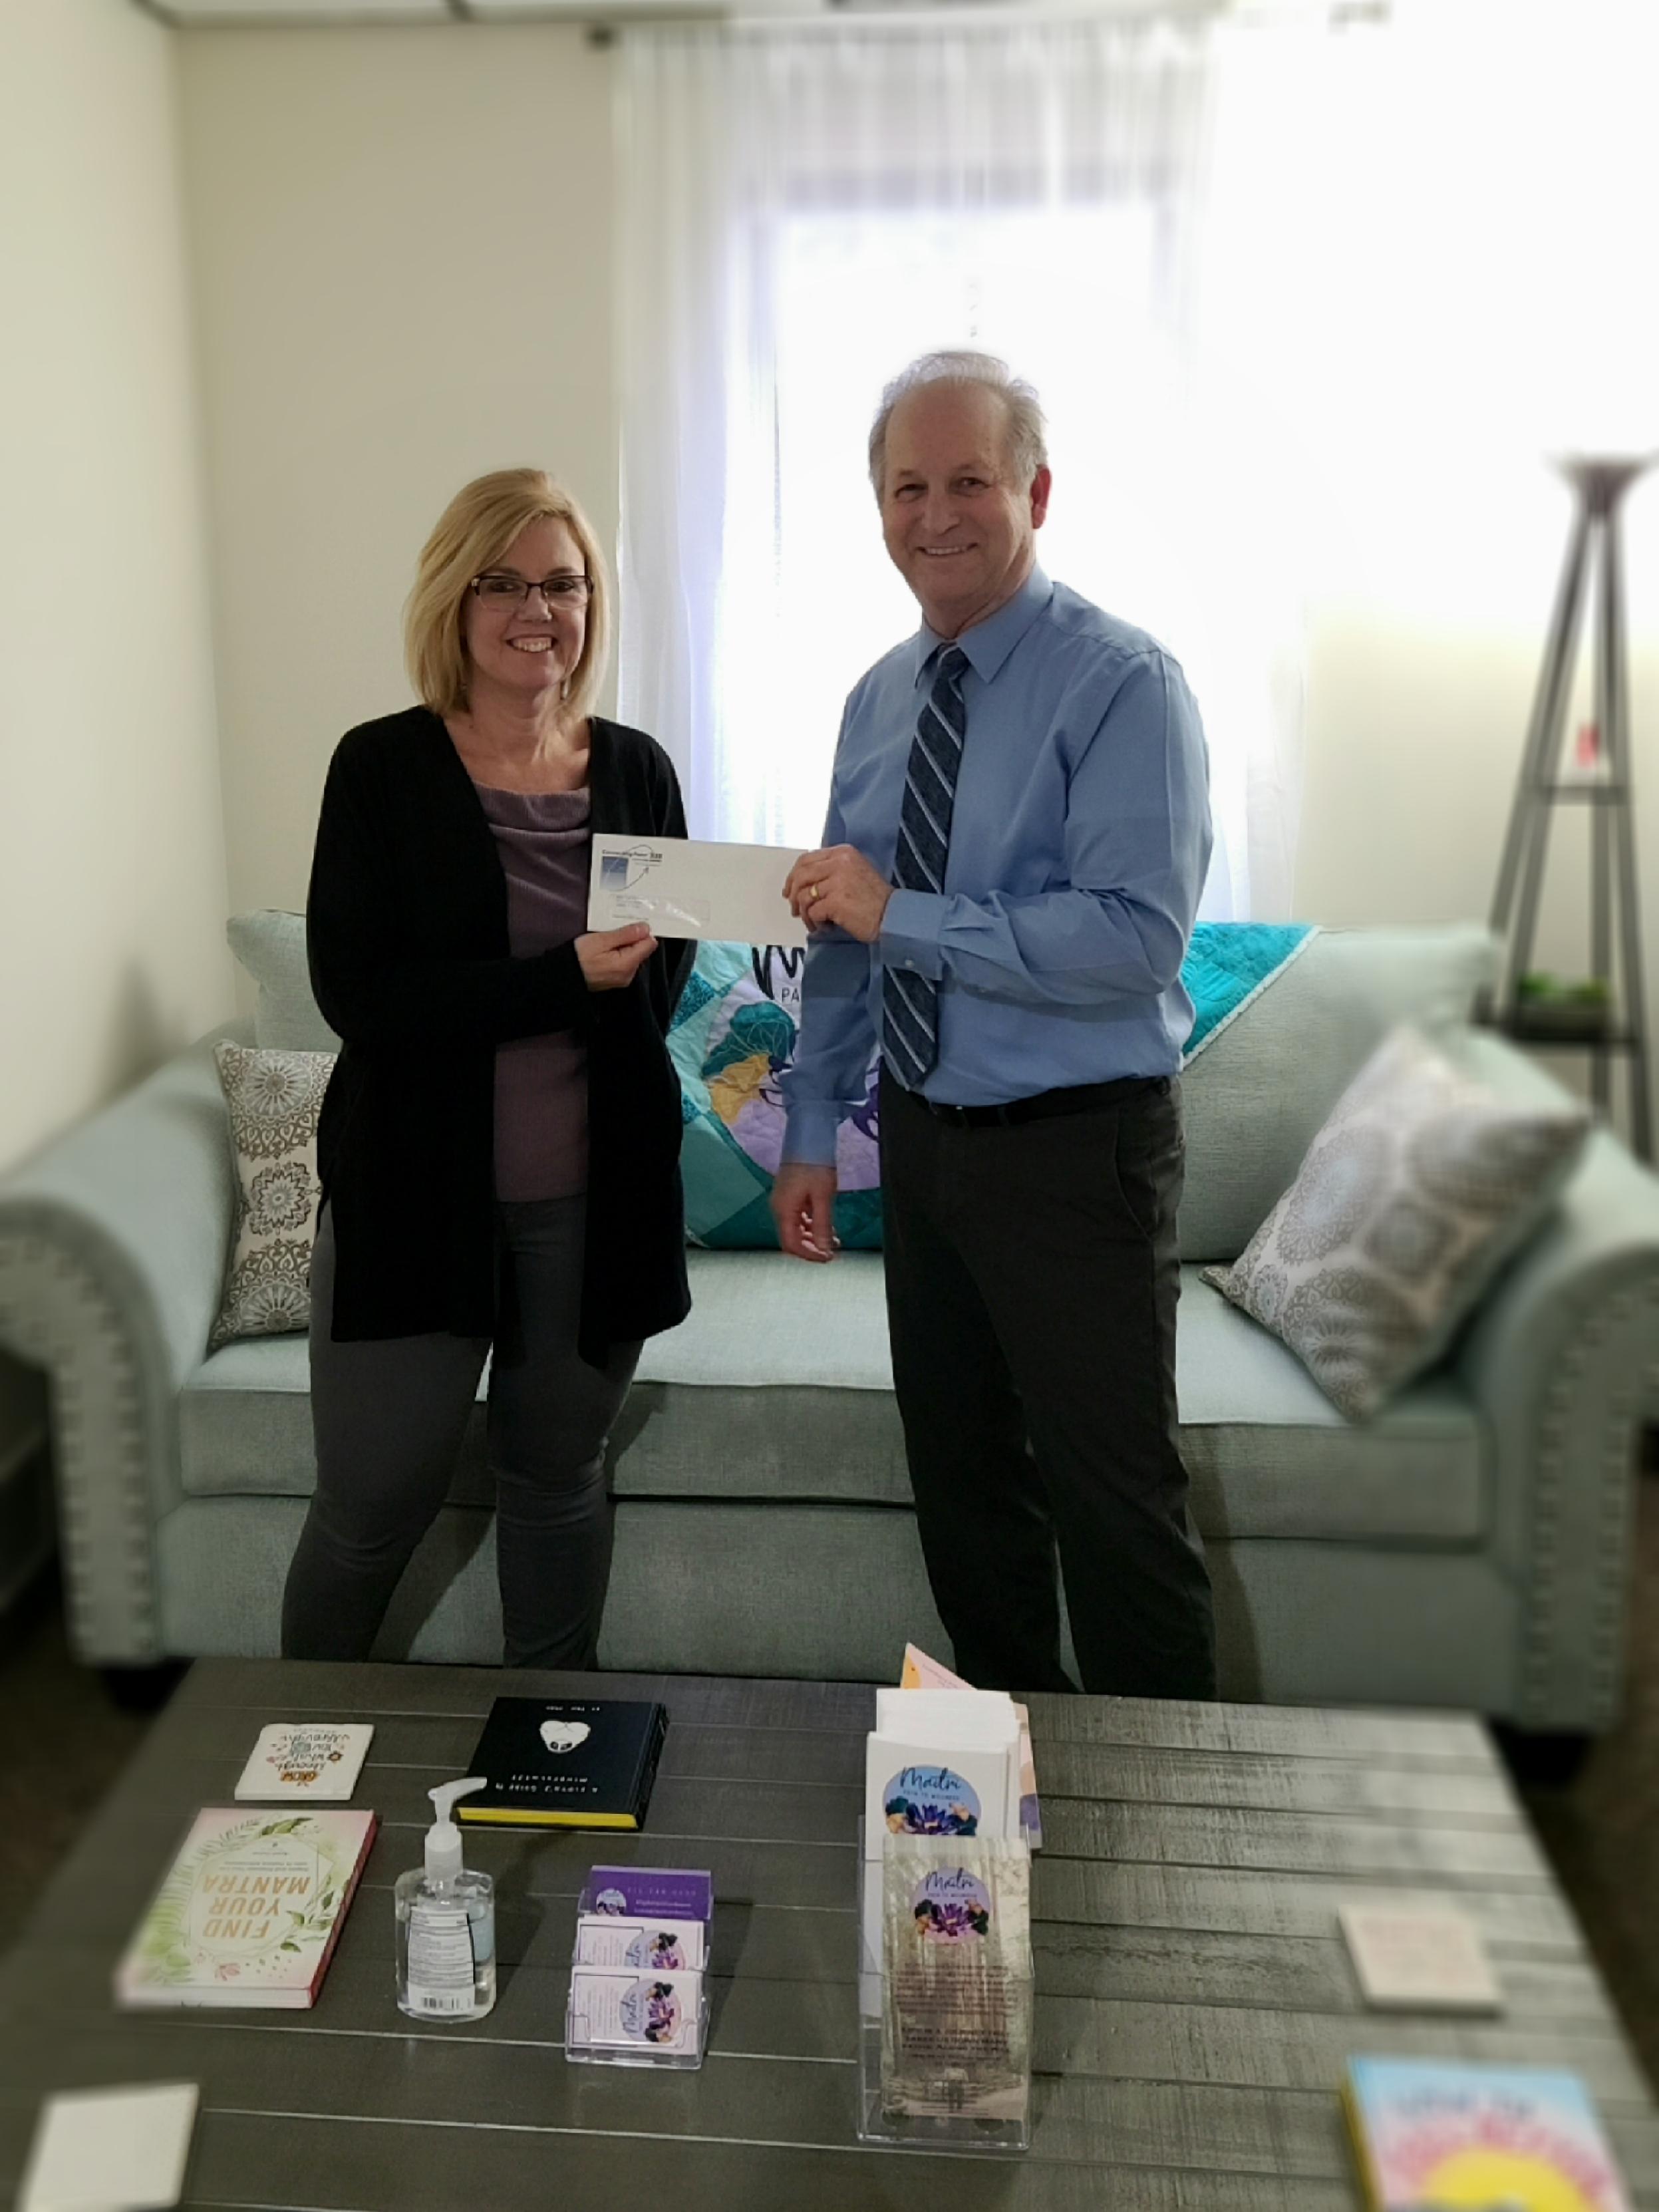 Maitri Path to Wellness LLC. is our December 2022 Jean Day Donation Recipient